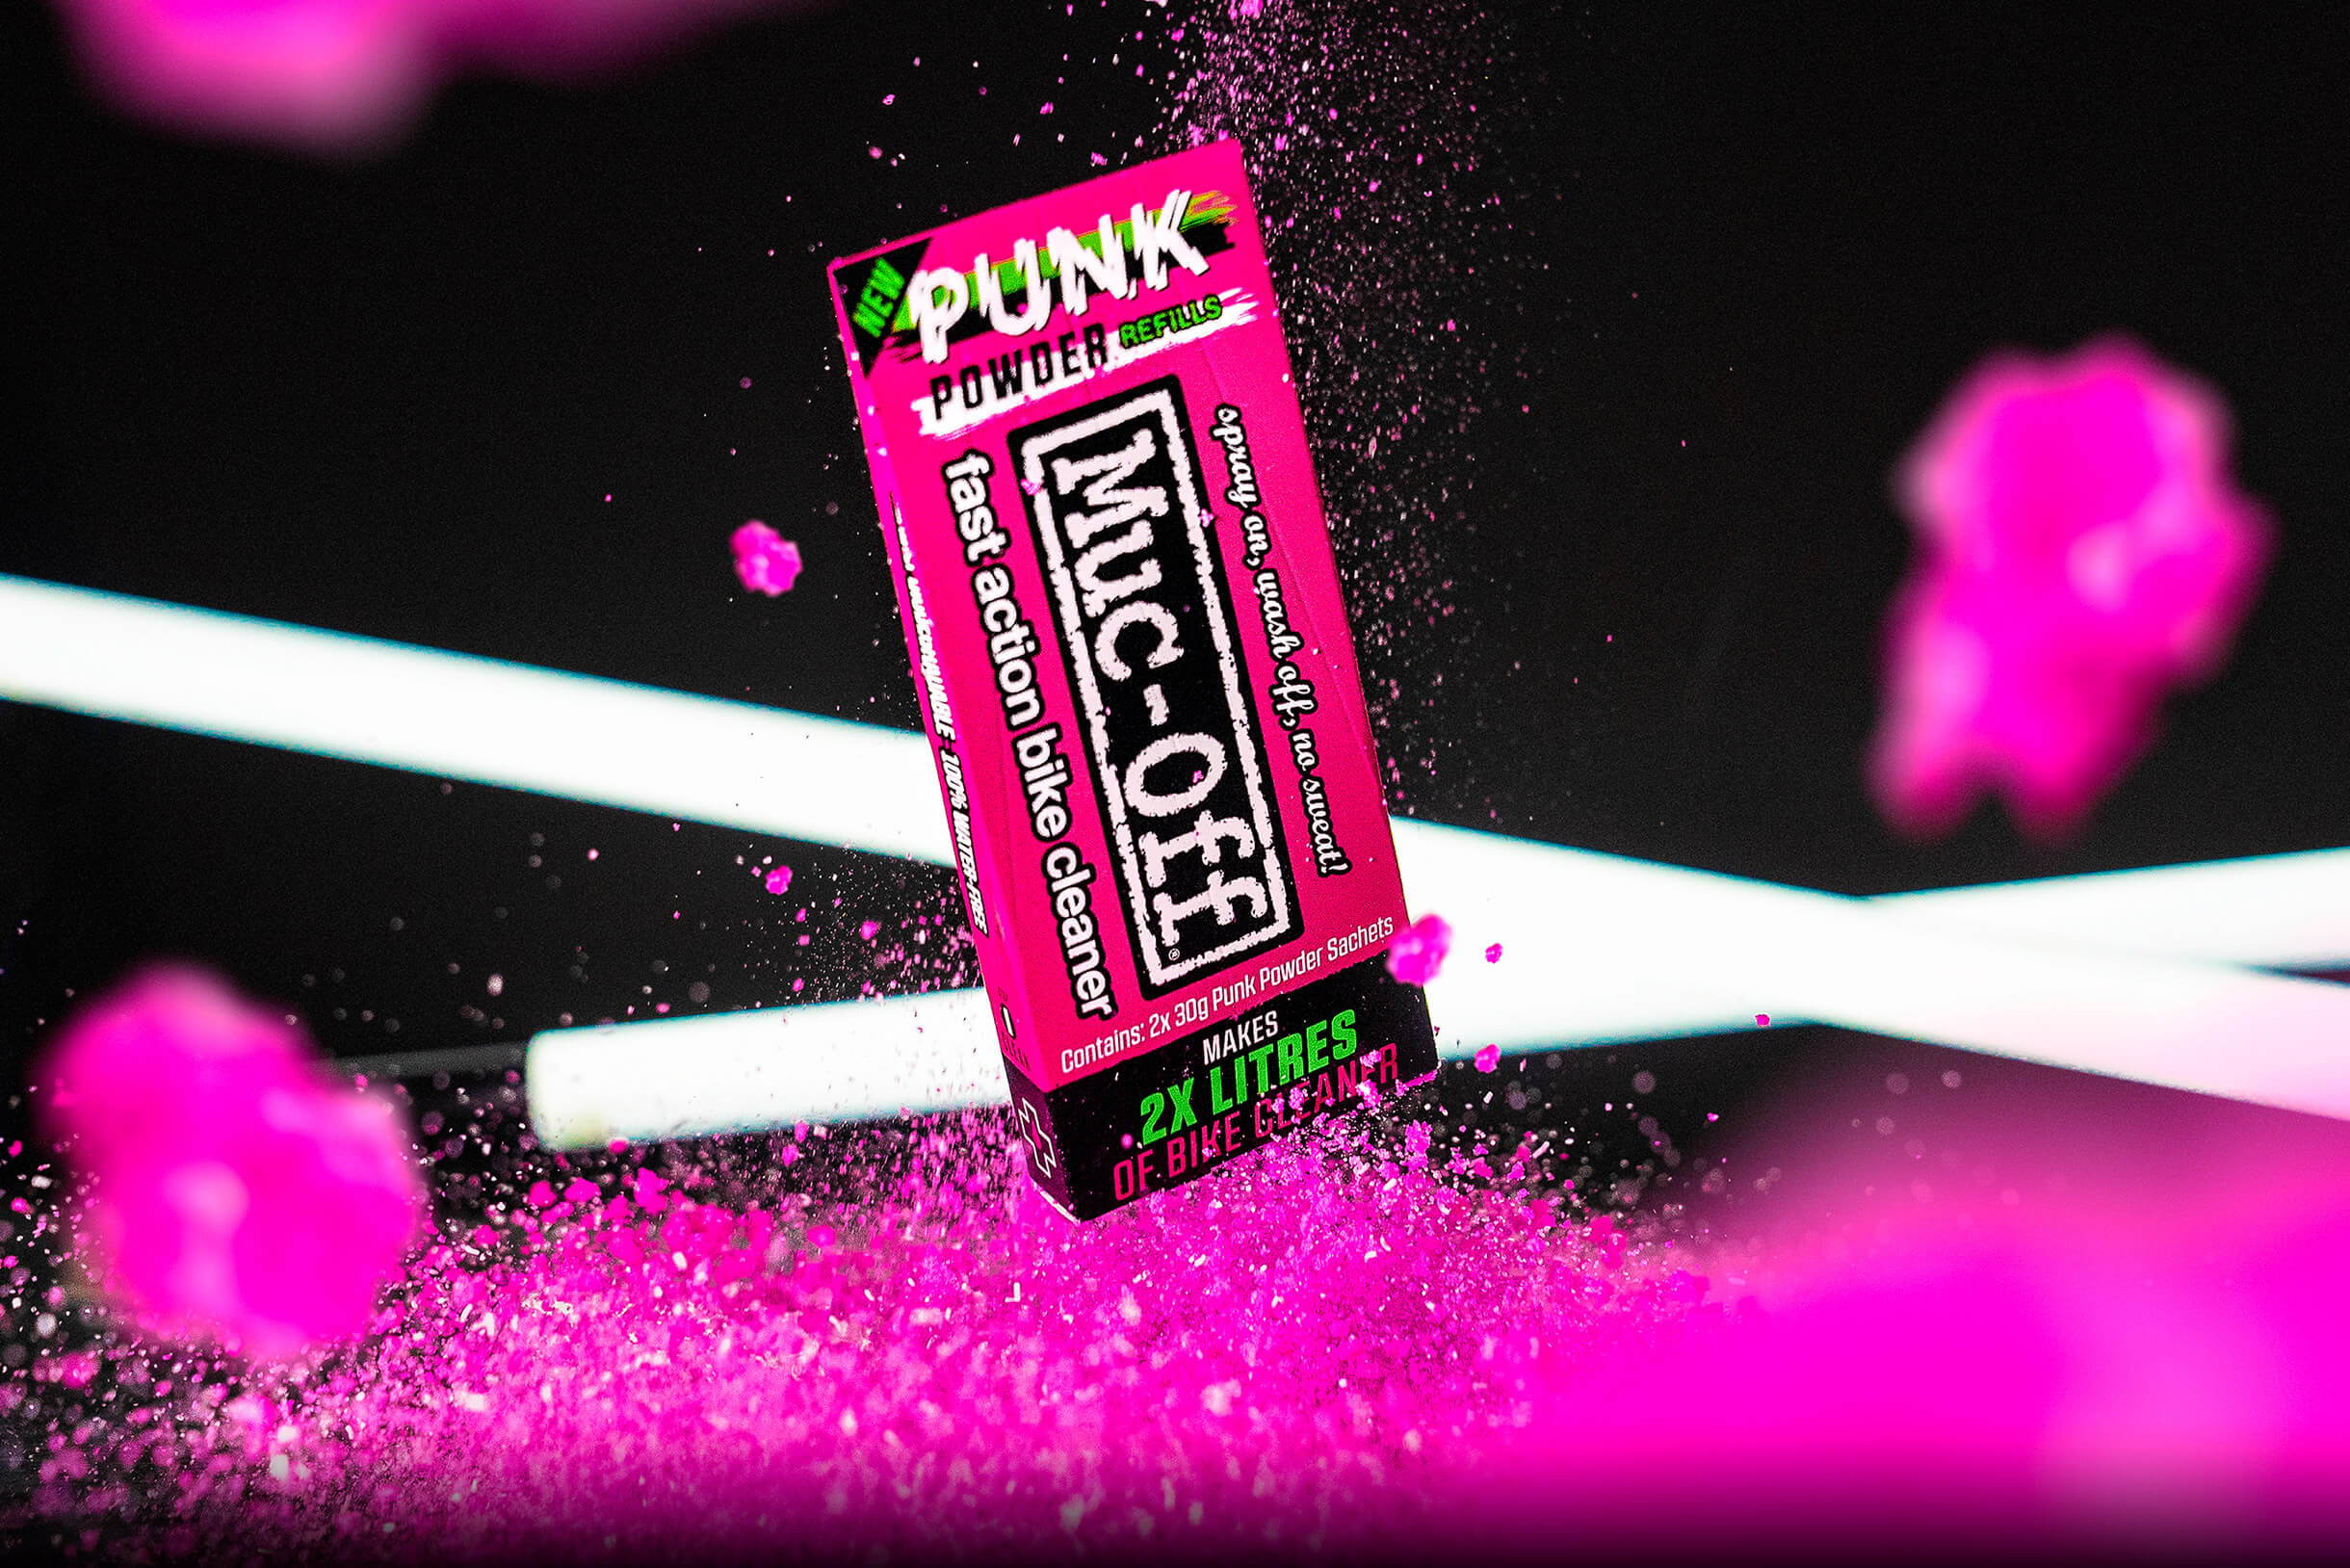 Introducing Punk Powder & Bottle for Life